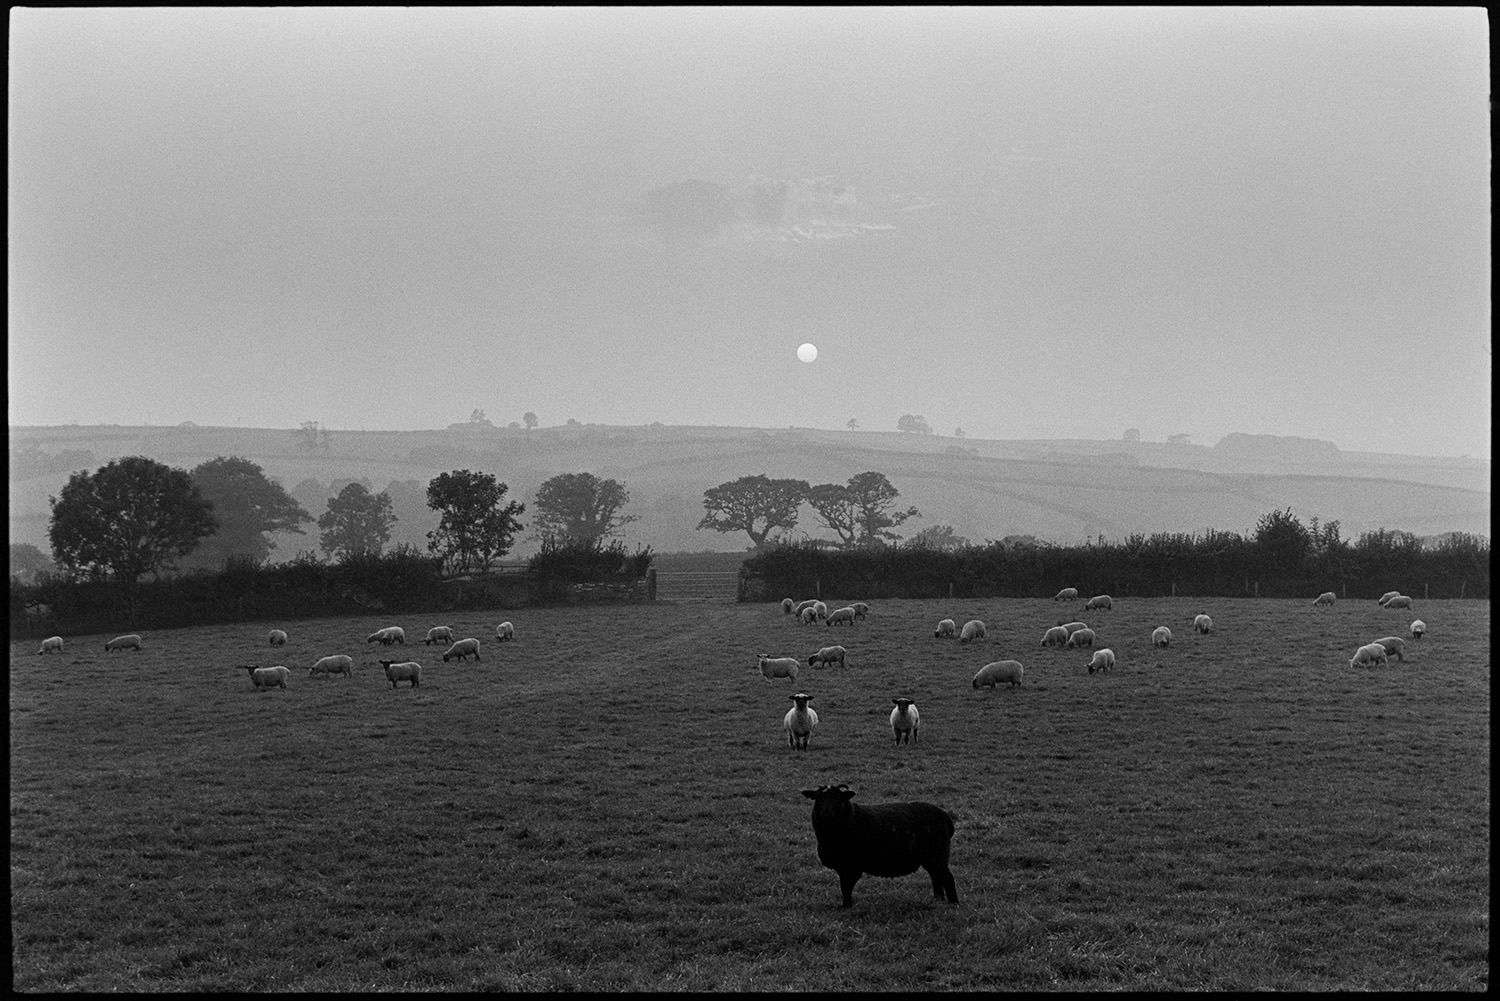 Sheep in evening landscape with setting sun. Sunset.
[One black sheep and many white sheep standing in a field at Brimblecombe, Dowland. The misty evening sunshine can be seen on hills in the background.]